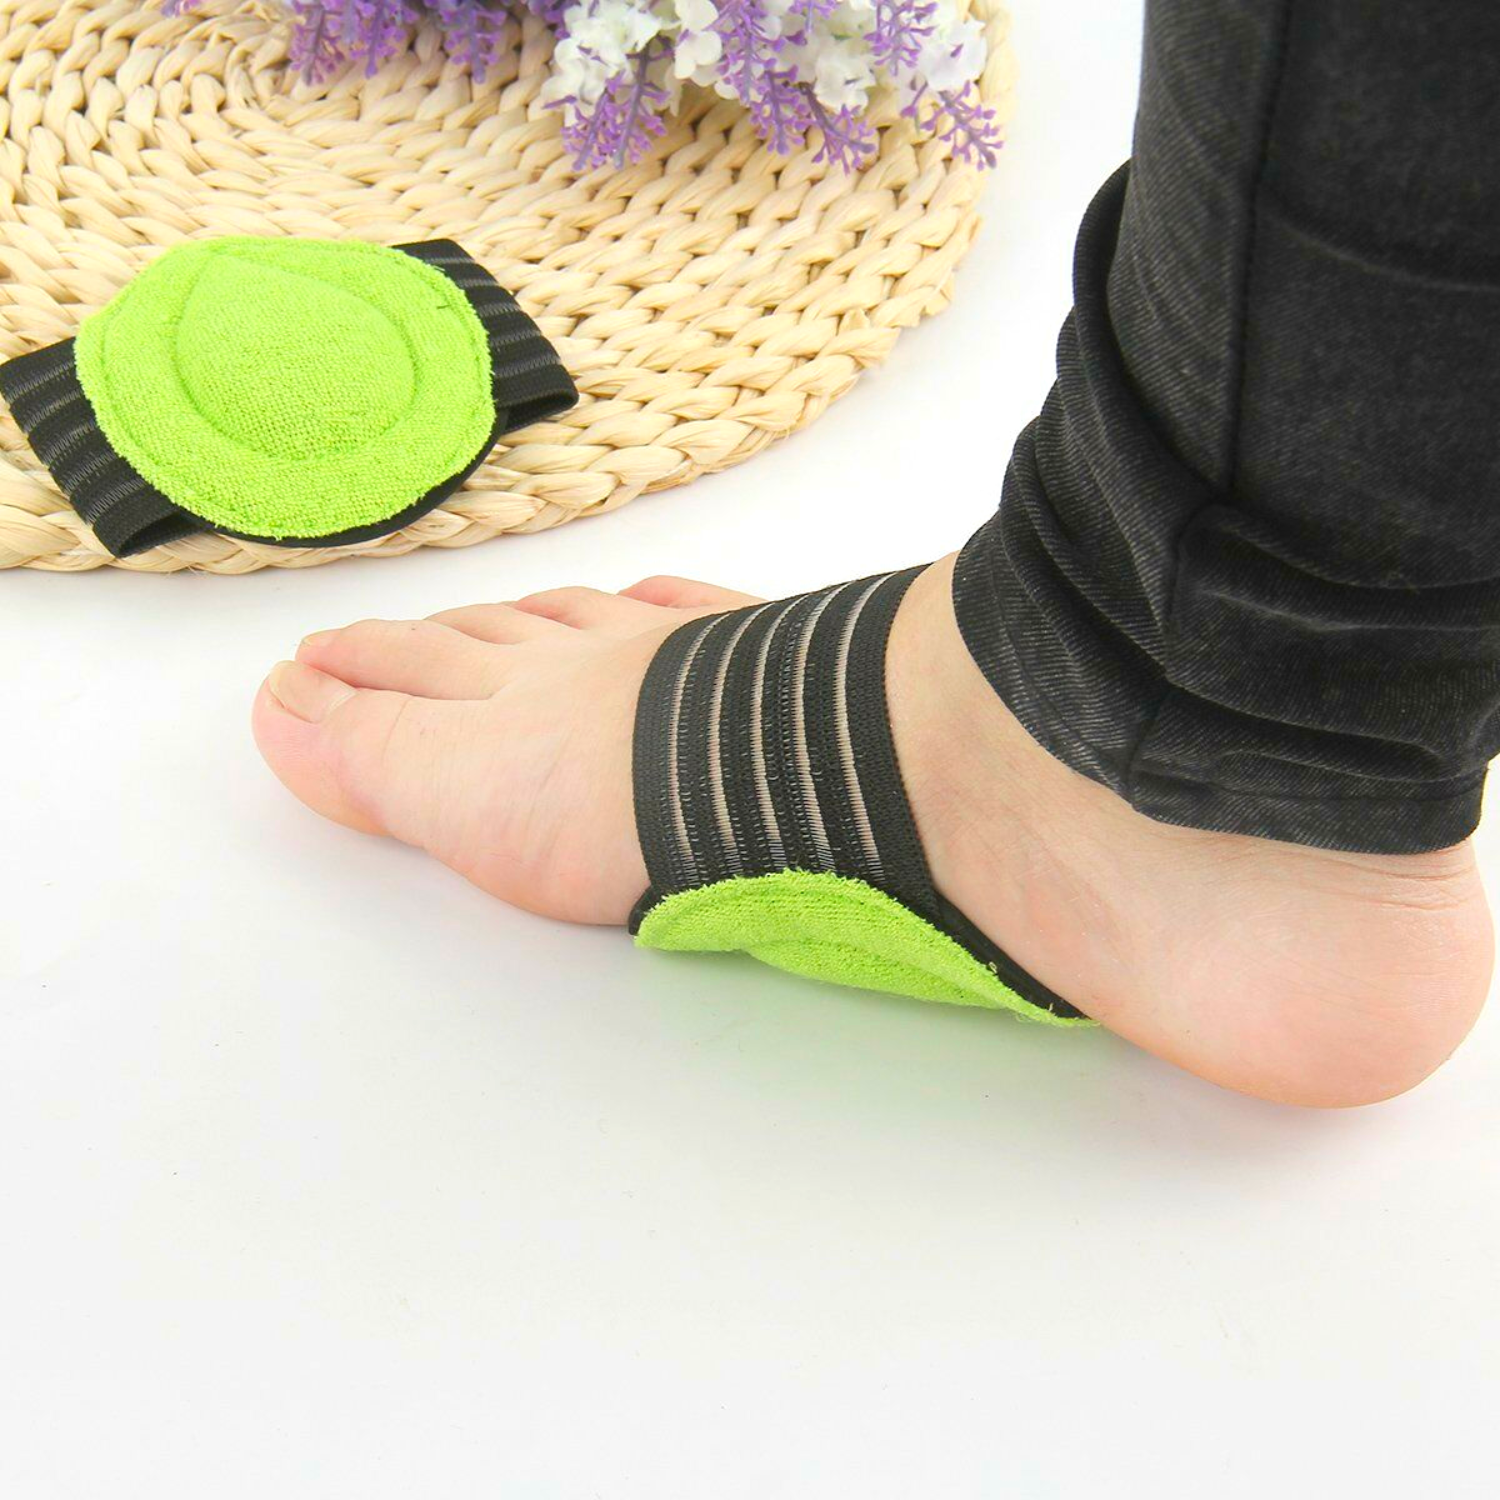 foot arch support plantar fasciitis heel aids cushion pain relief absorb shocking feet care elastic band arch support cushions